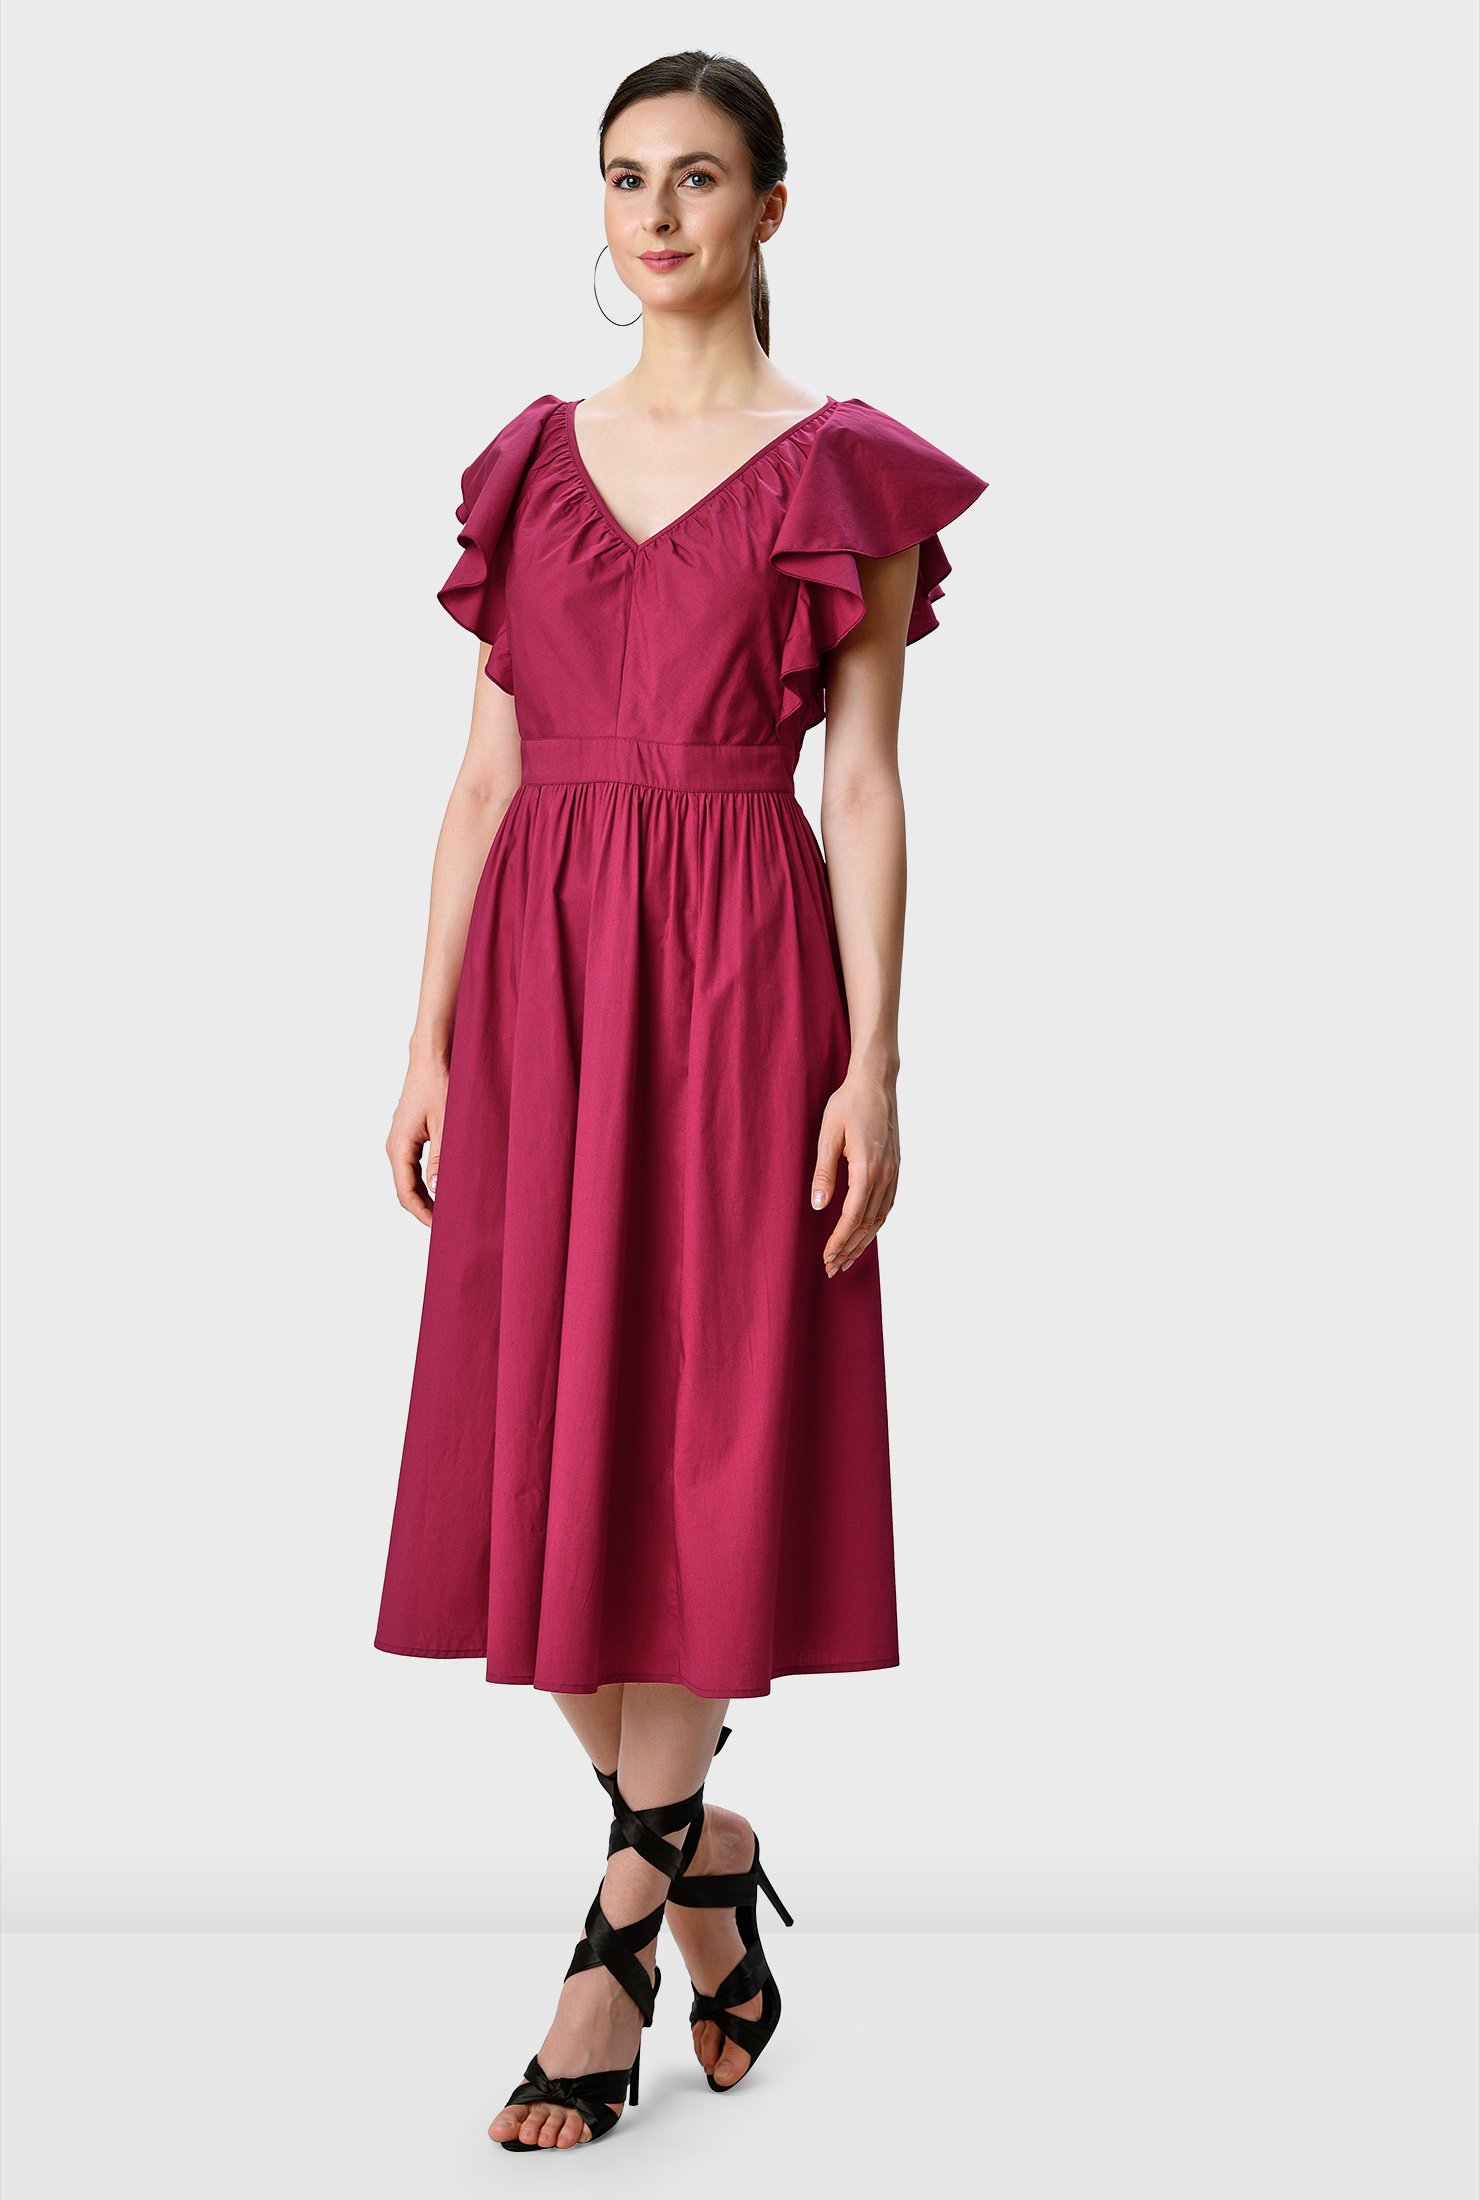 Lush ruffles spring from the shoulders down to the banded waist of our cotton poplin dress adding flutter and texture to the fit-and-flare silhouette. 